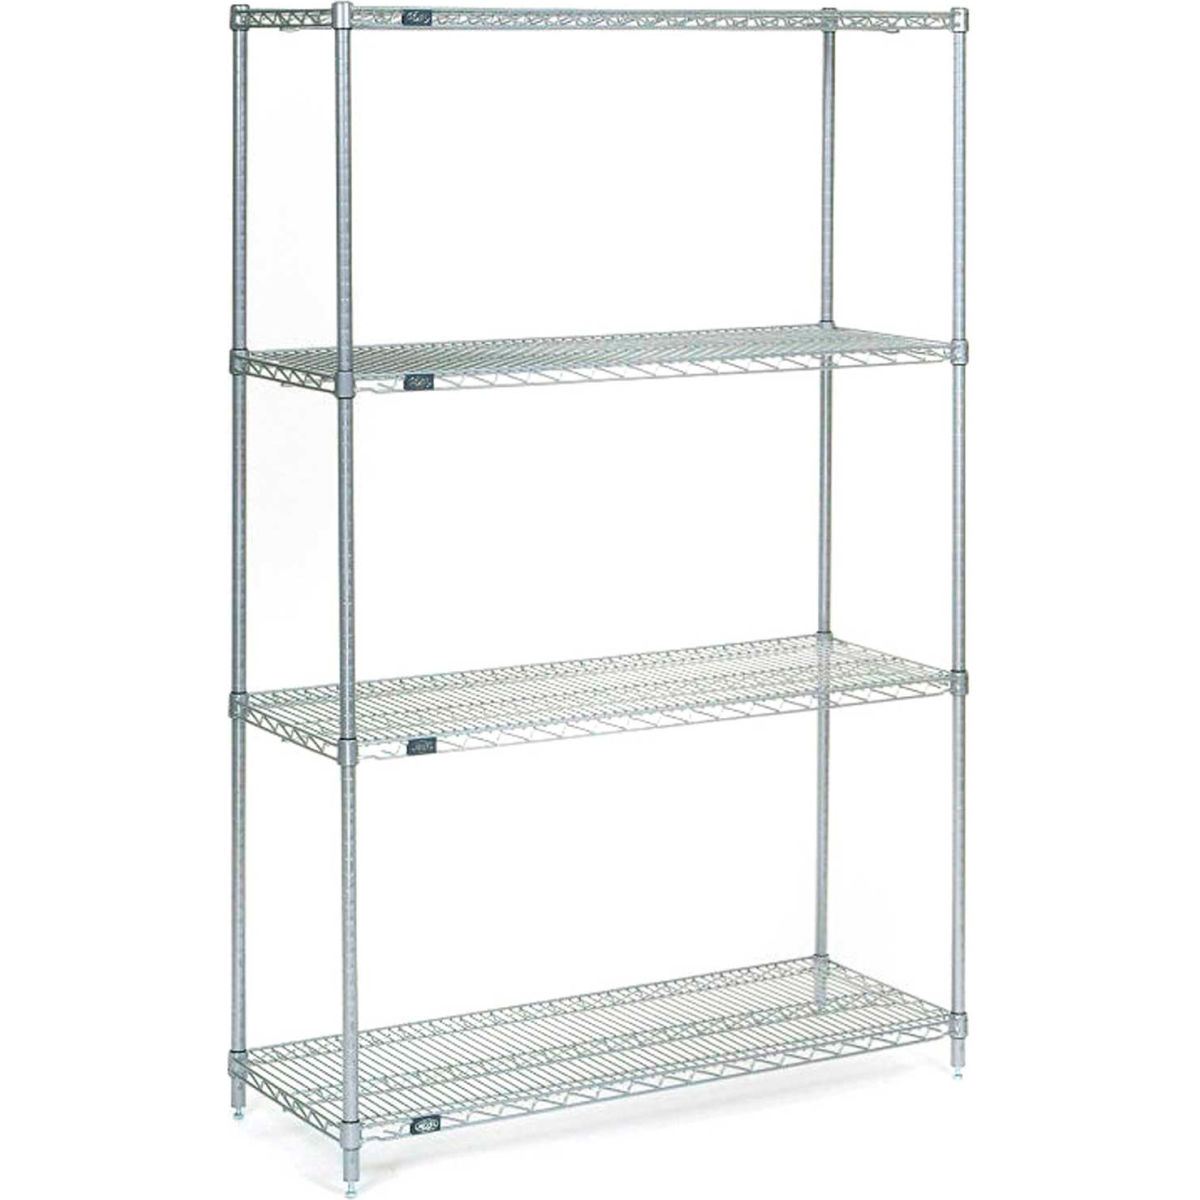 Picture of Global Industrial 14425S 54 x 42 x 14 in. Nexel Stainless Steel Starter Wire Shelving